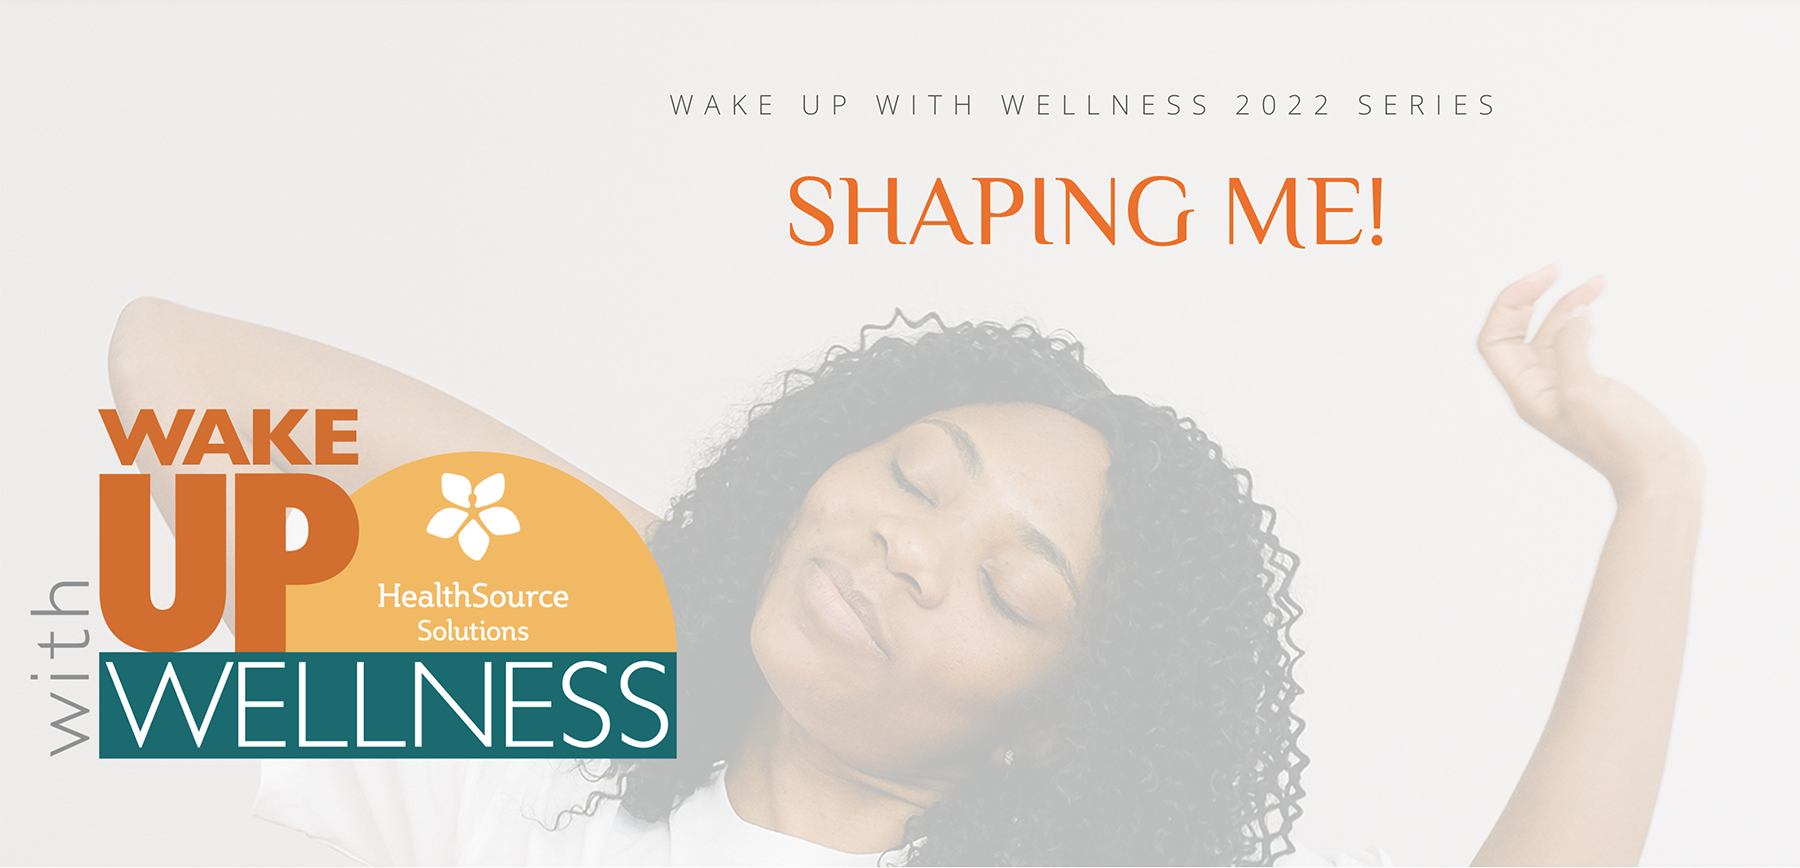 Wake up with wellness logo superimposed over black woman stretching with eyes shut